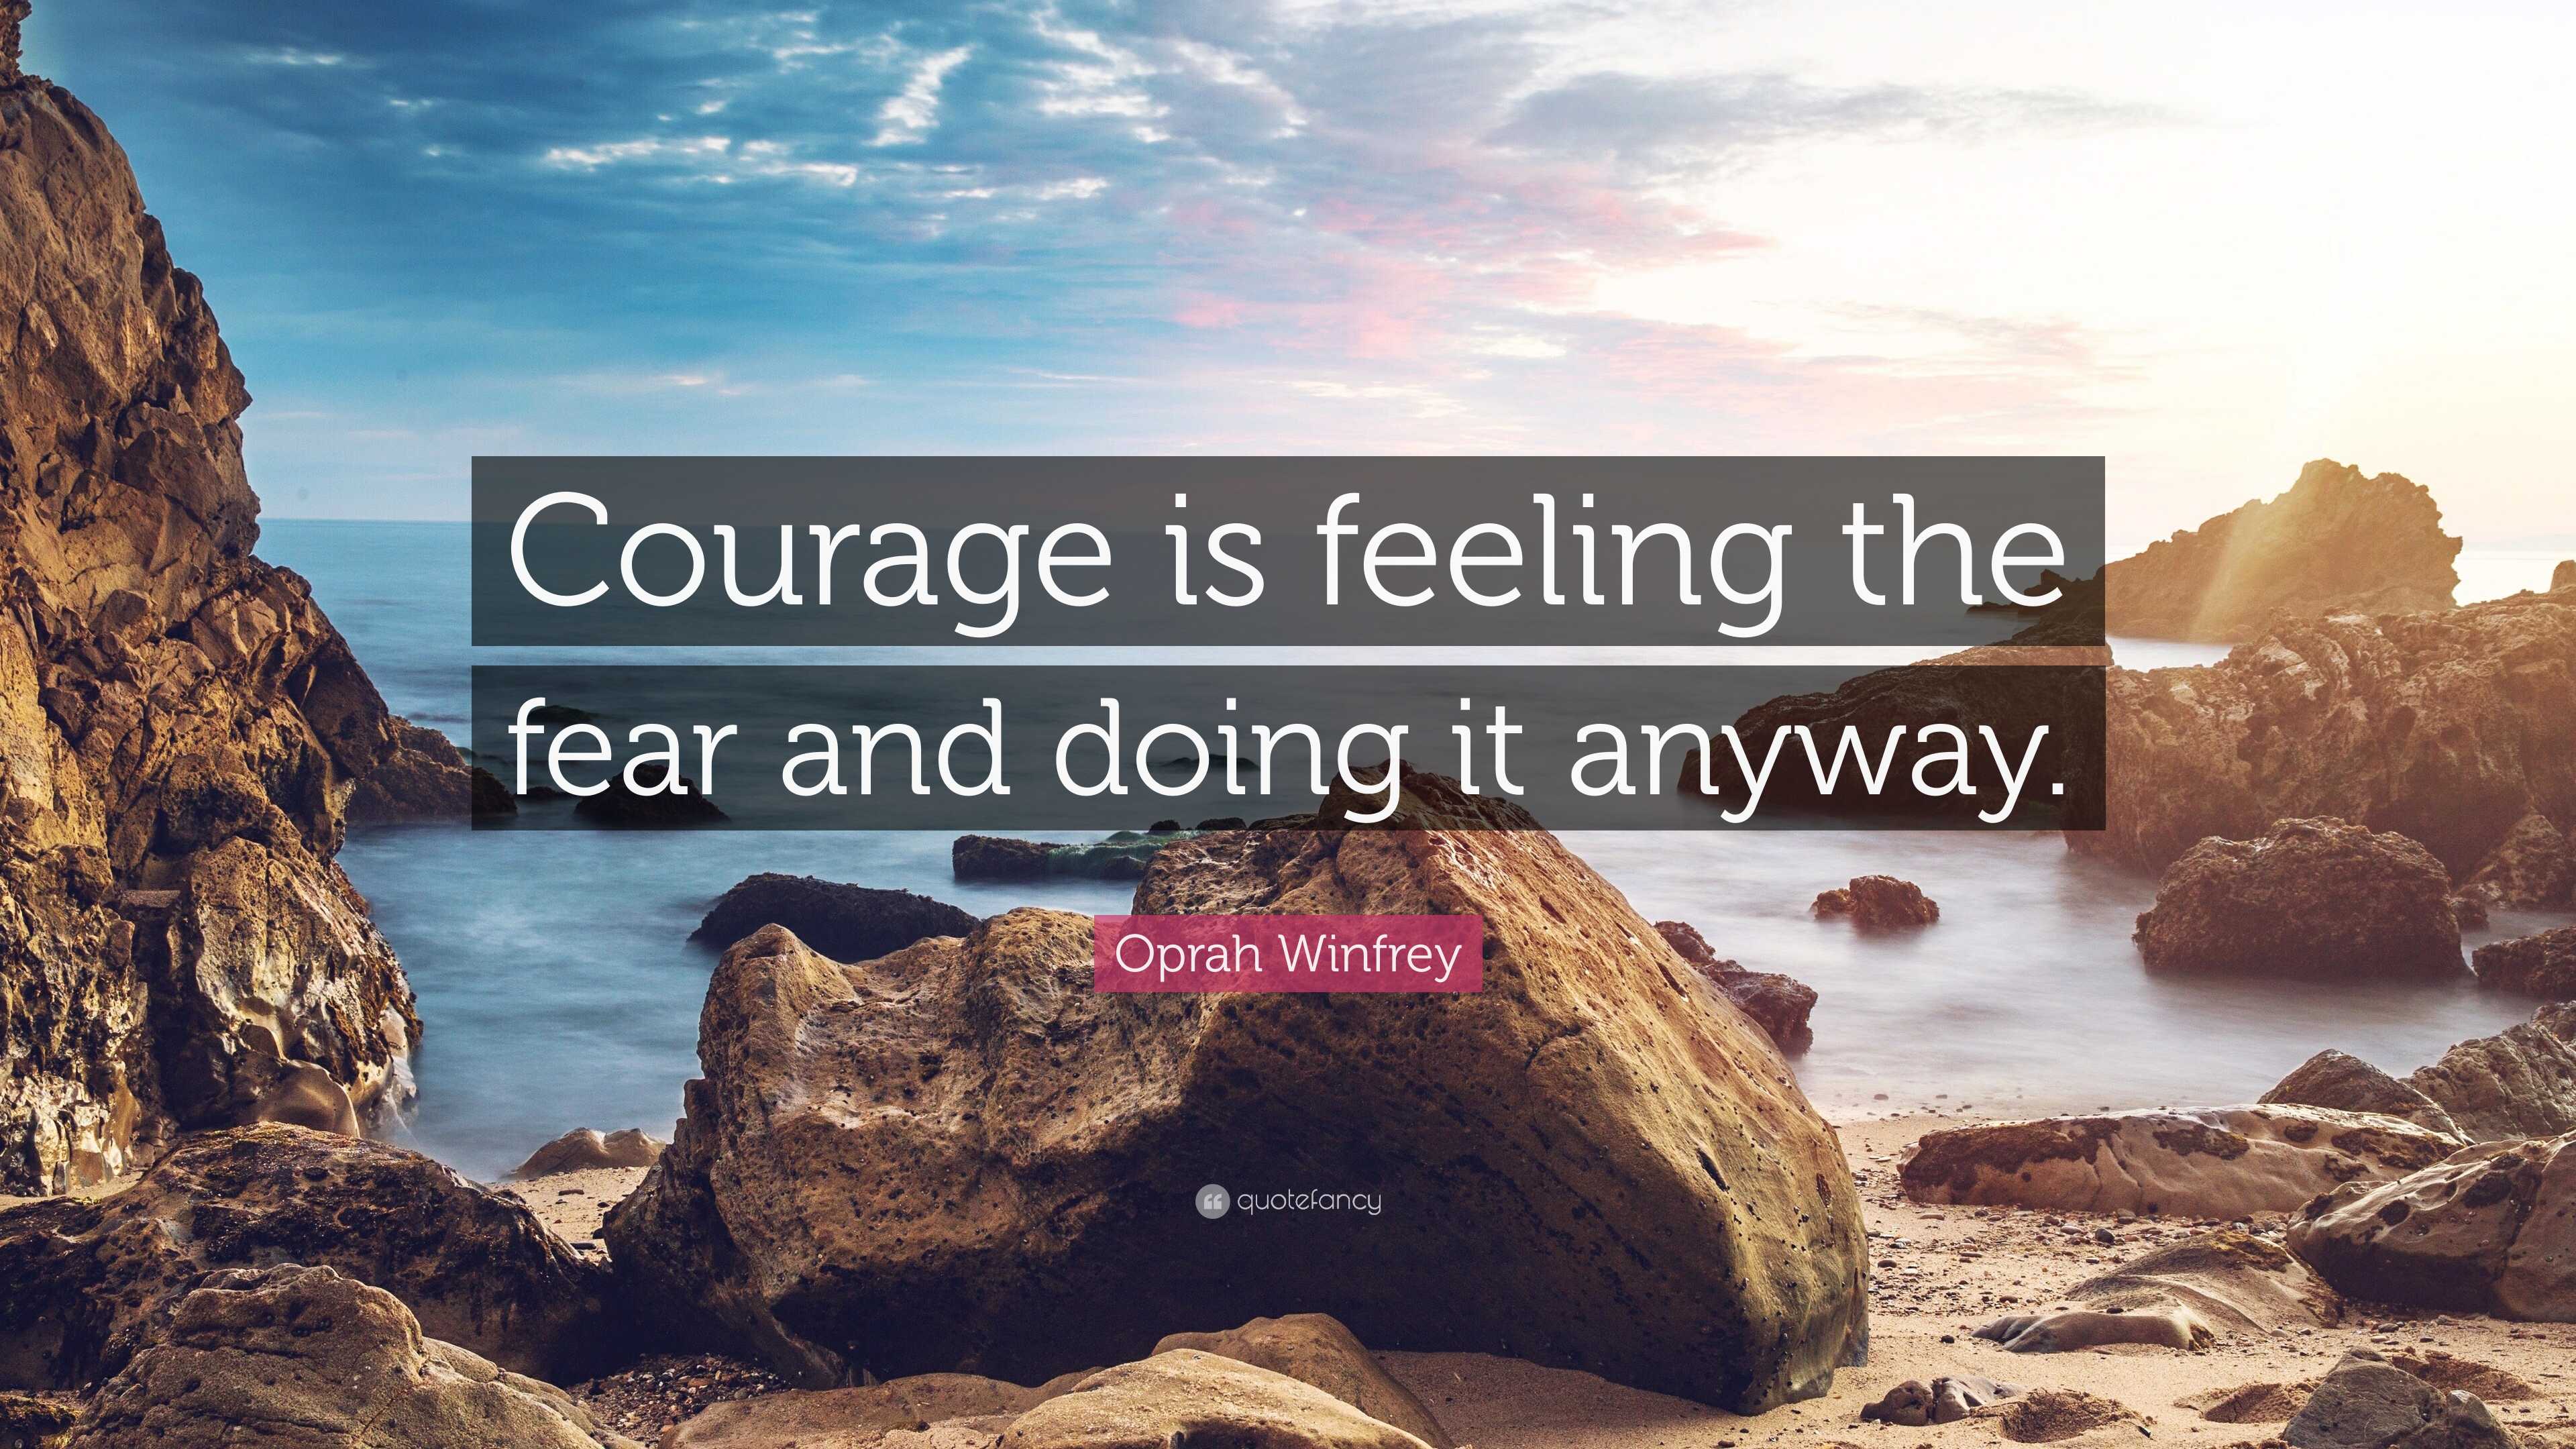 Oprah Winfrey Quote: “Courage is feeling the fear and doing it anyway.”